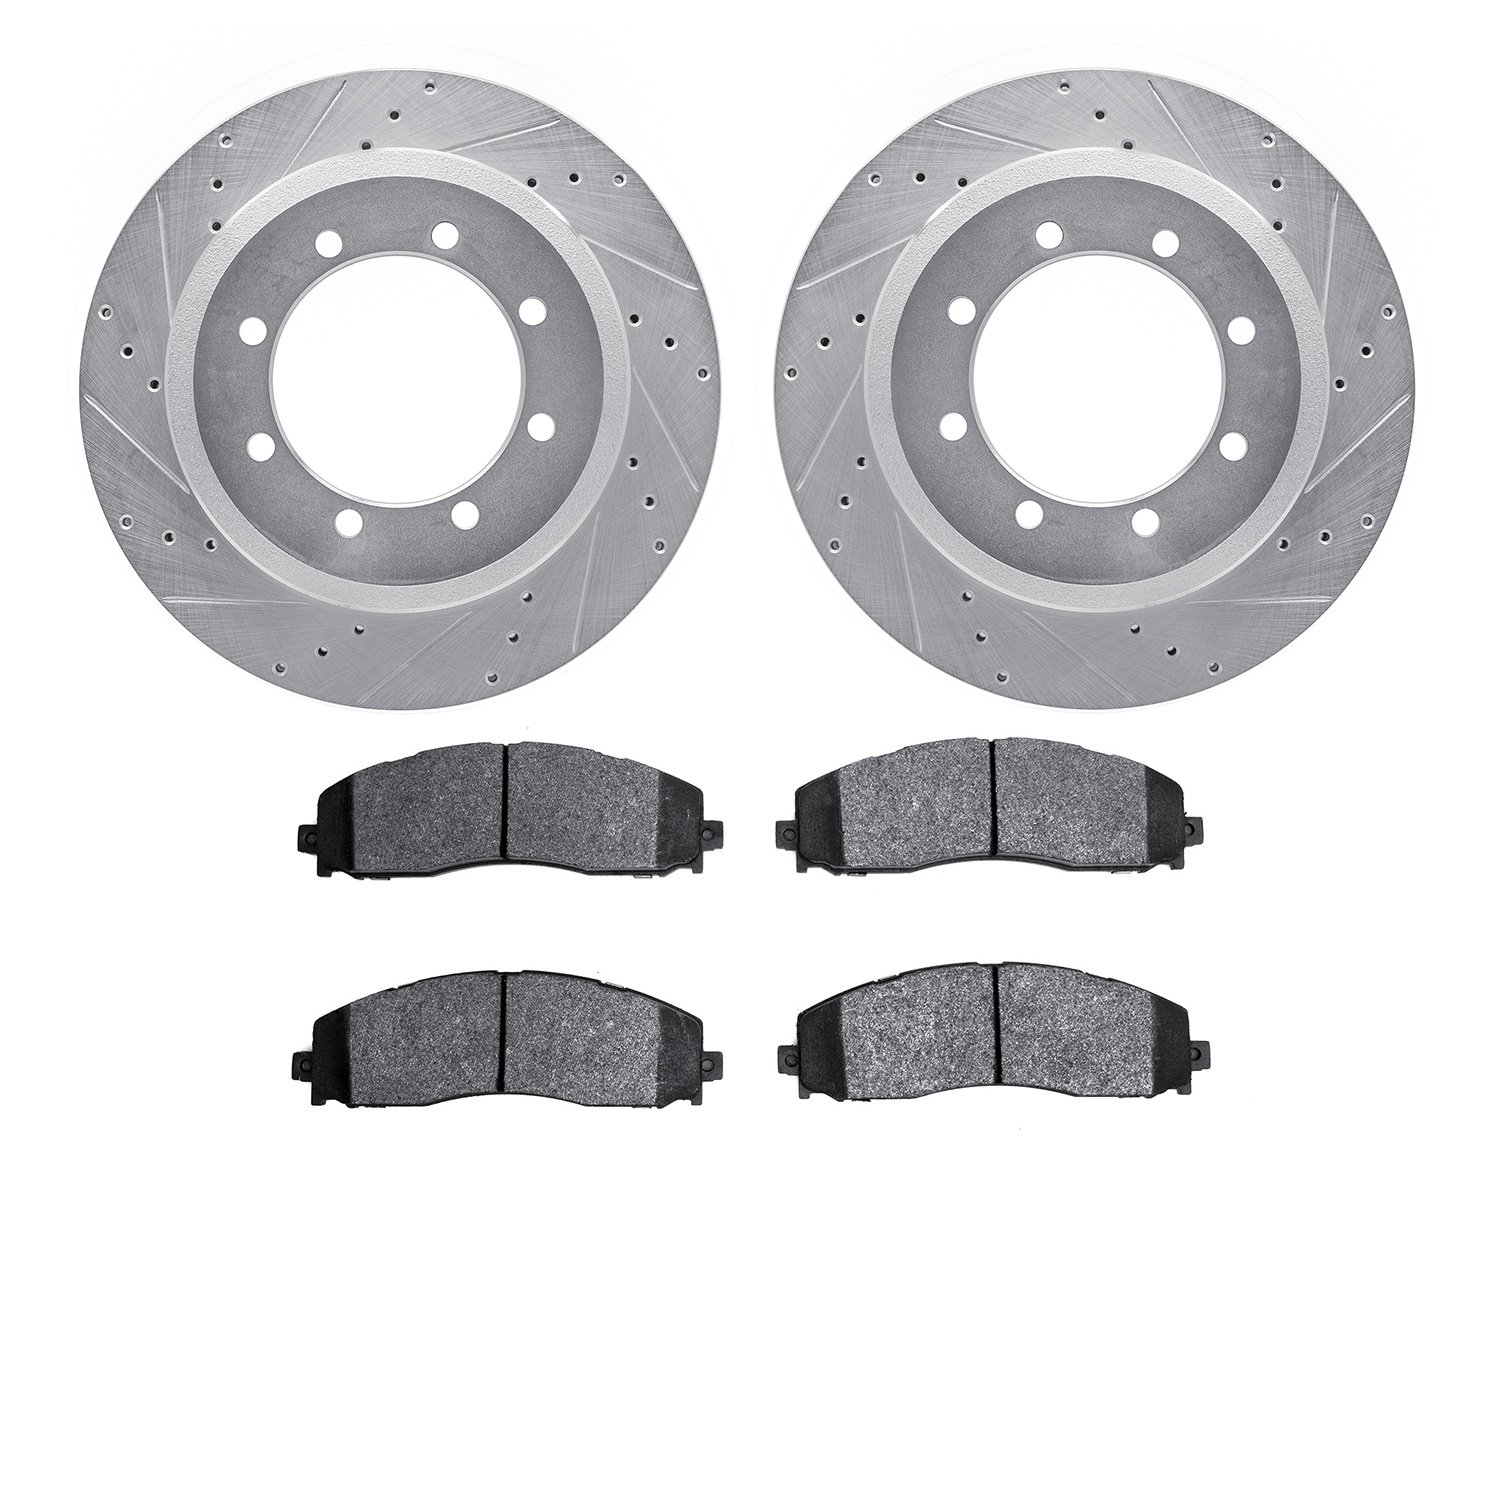 7202-99231 Drilled/Slotted Rotors w/Heavy-Duty Brake Pads Kit [Silver], Fits Select Ford/Lincoln/Mercury/Mazda, Position: Rear